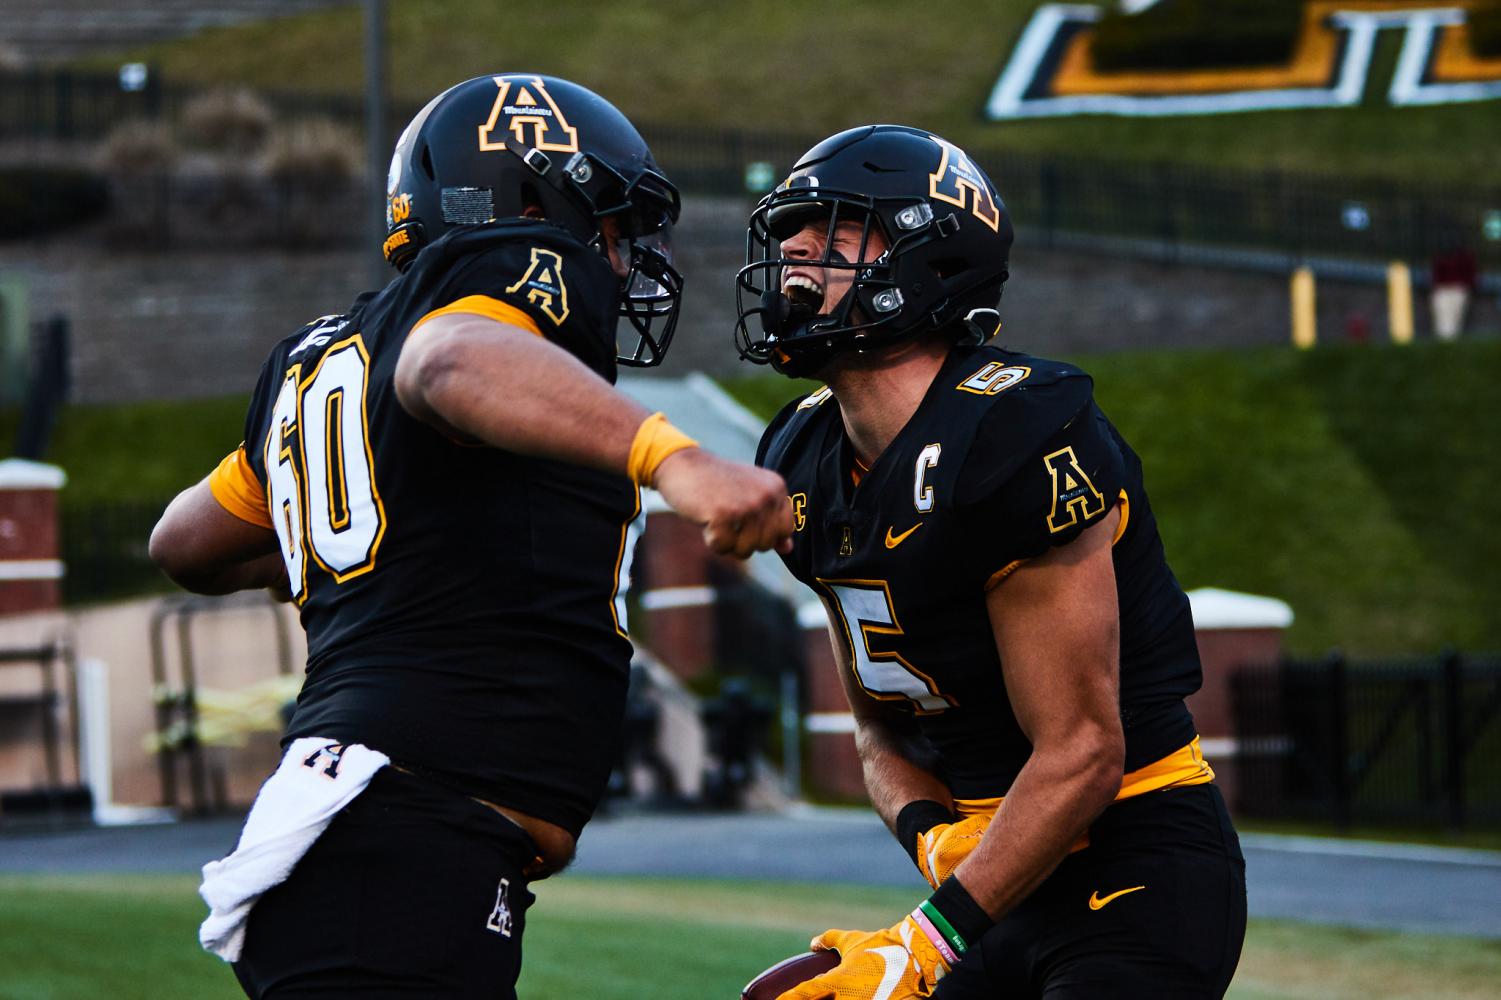 App State football ends regular season on top with 34-26 win at Georgia Southern – The Appalachian